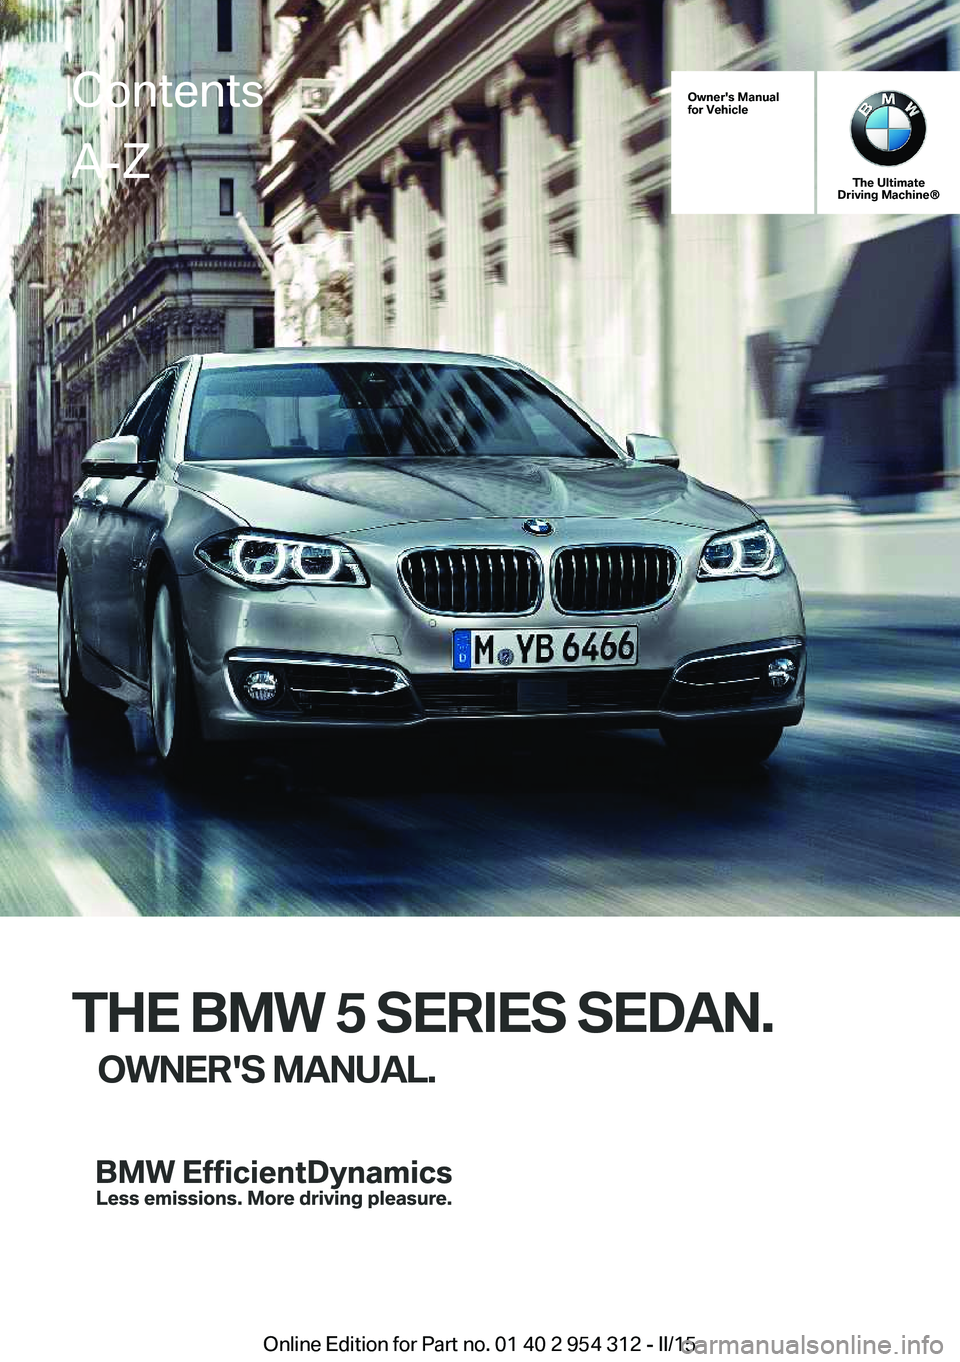 BMW 535I XDRIVE SEDAN 2016  Owners Manual Owner's Manual
for Vehicle
The Ultimate
Driving Machine®
THE BMW 5 SERIES SEDAN.
OWNER'S MANUAL.
ContentsA-Z
Online Edition for Part no. 01 40 2 954 312 - II/15   